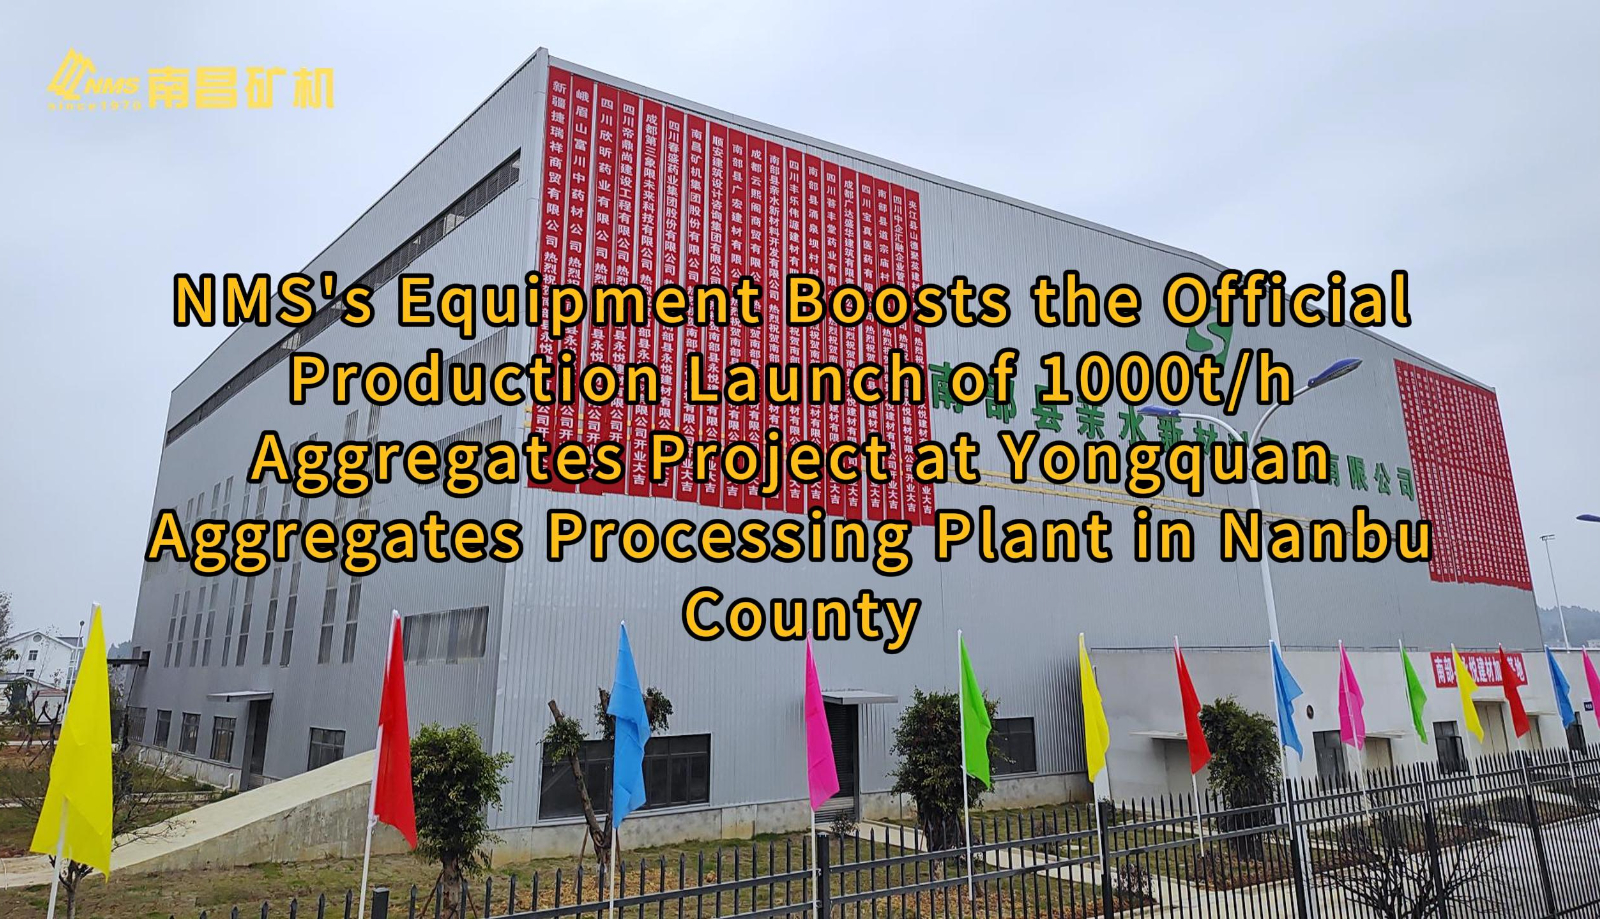 NMS Equipment Powers 1000t/h Aggregates Project Launch at Yongquan Plant in Nanbu County